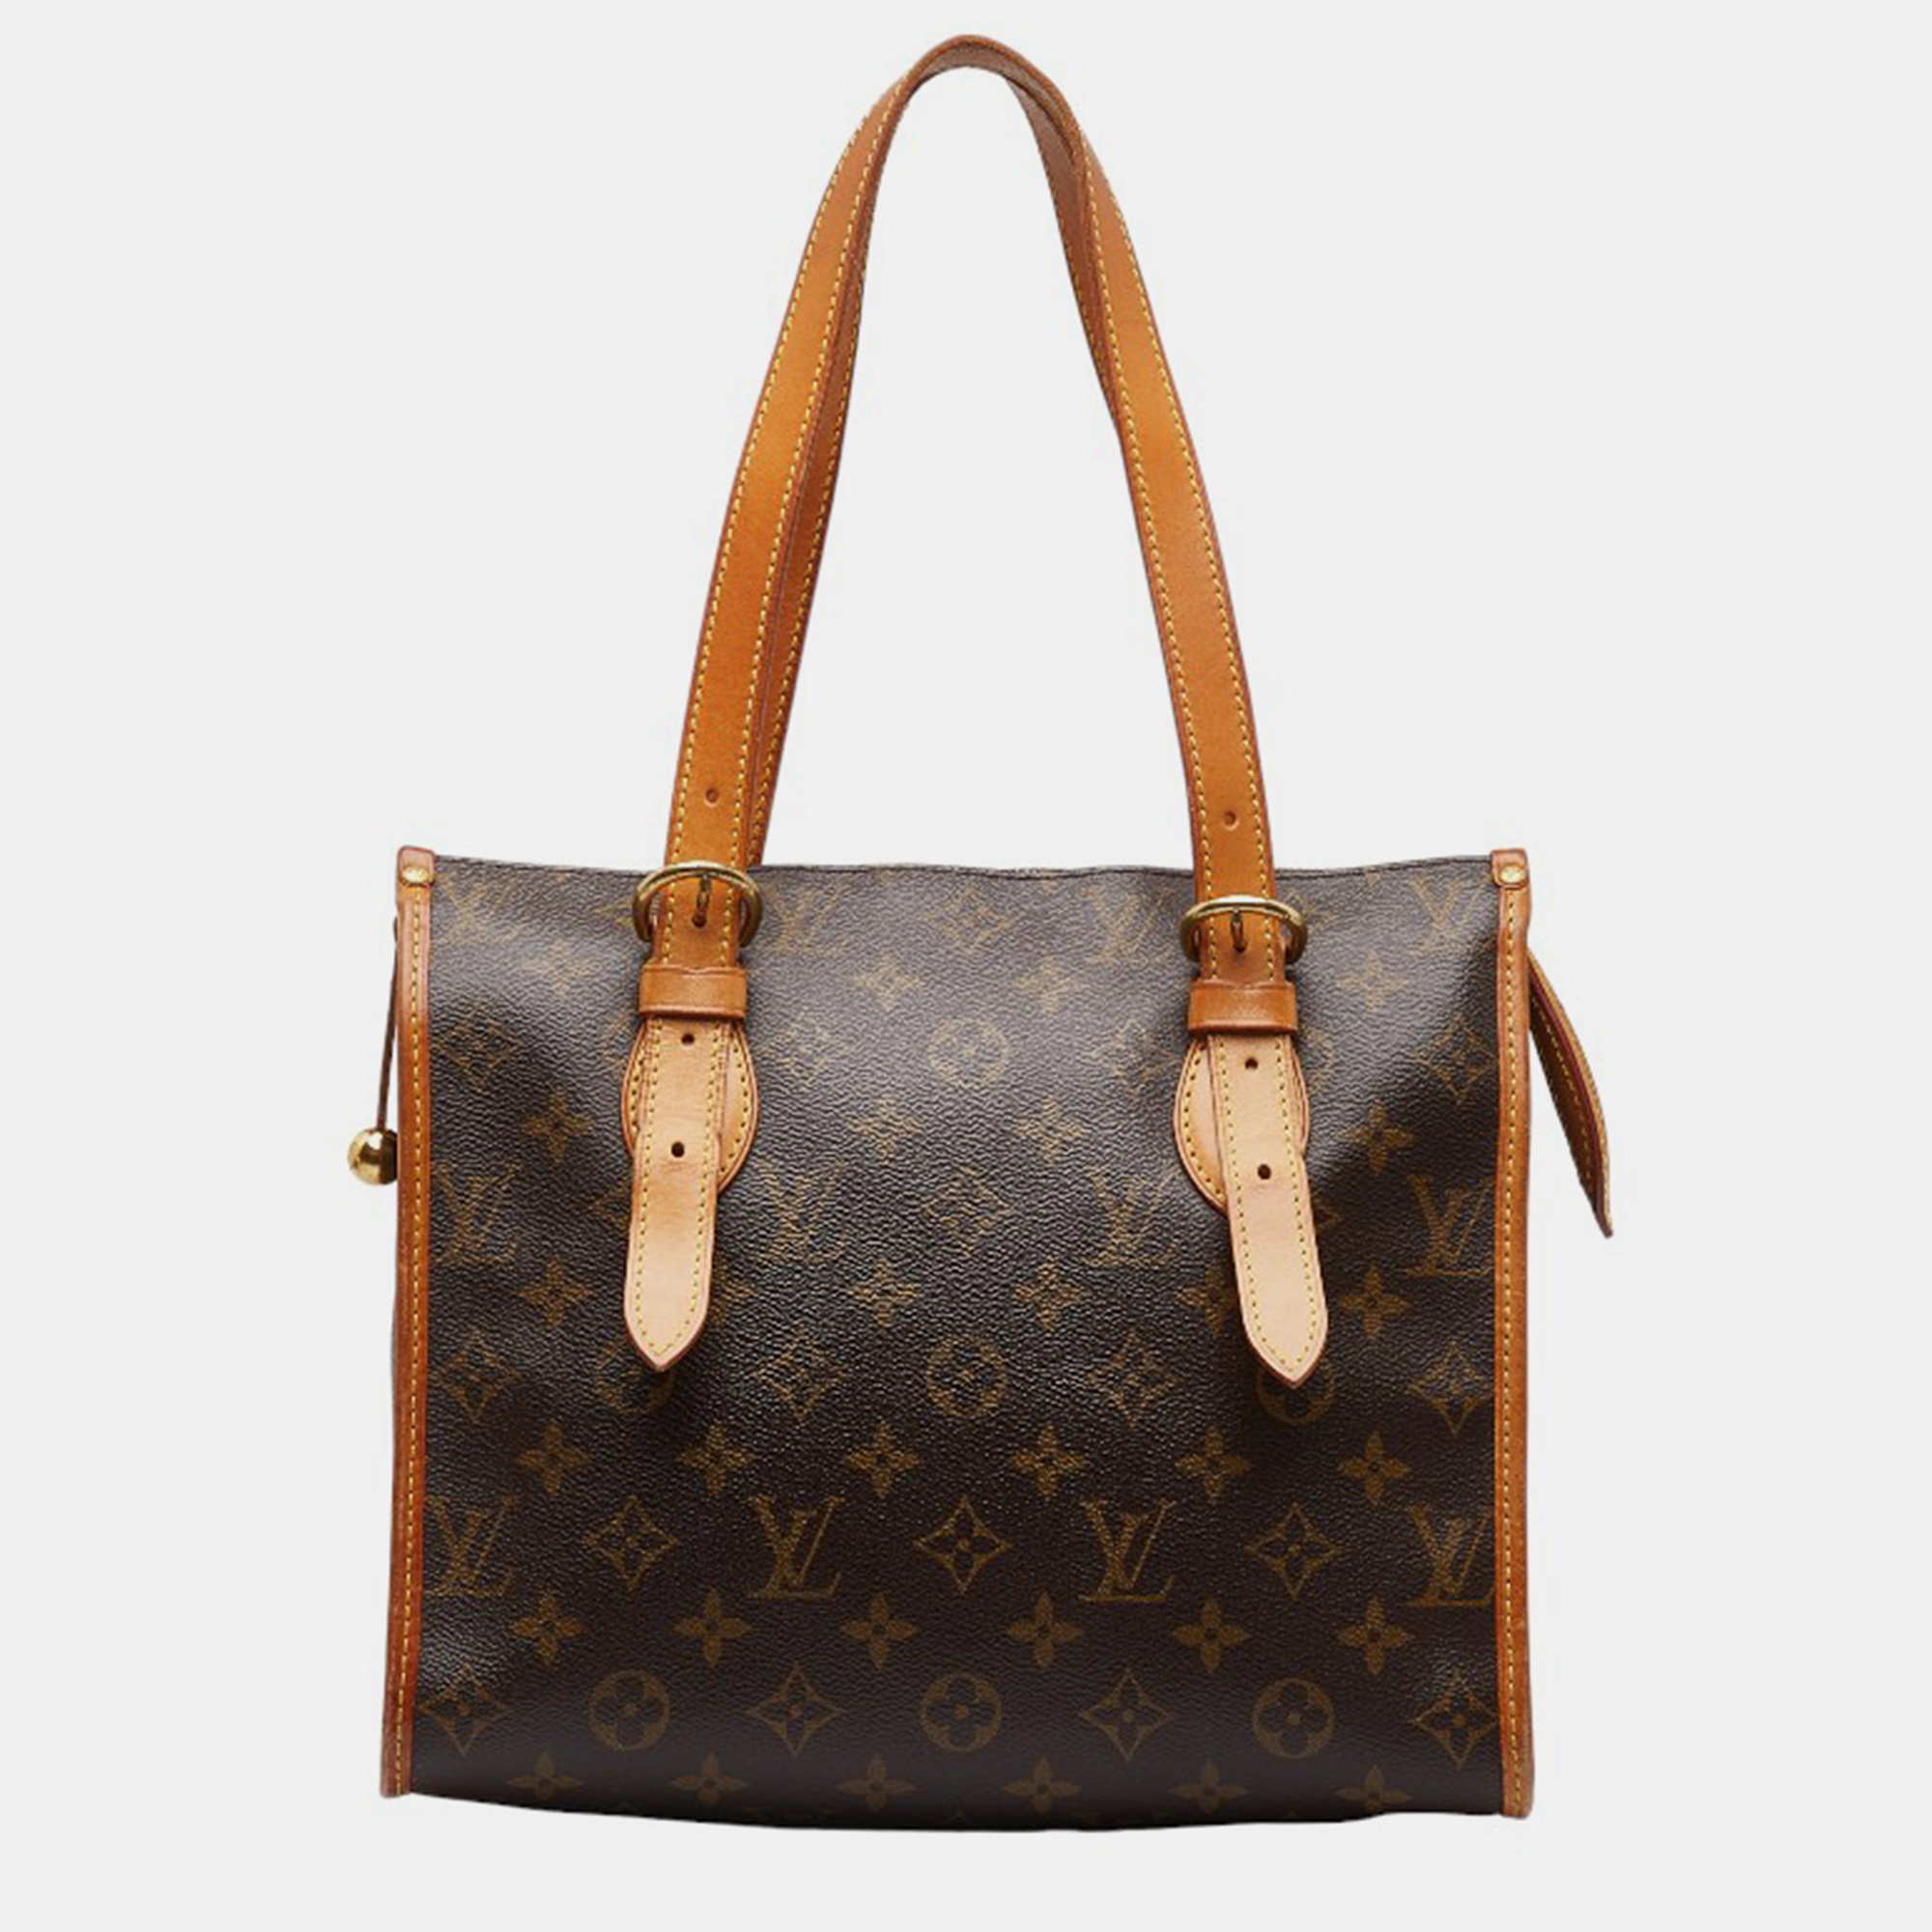 Elevate your every day with this Louis Vuitton tote. Meticulously designed it seamlessly blends functionality with luxury offering the perfect accessory to showcase your discerning style while effortlessly carrying your essentials.